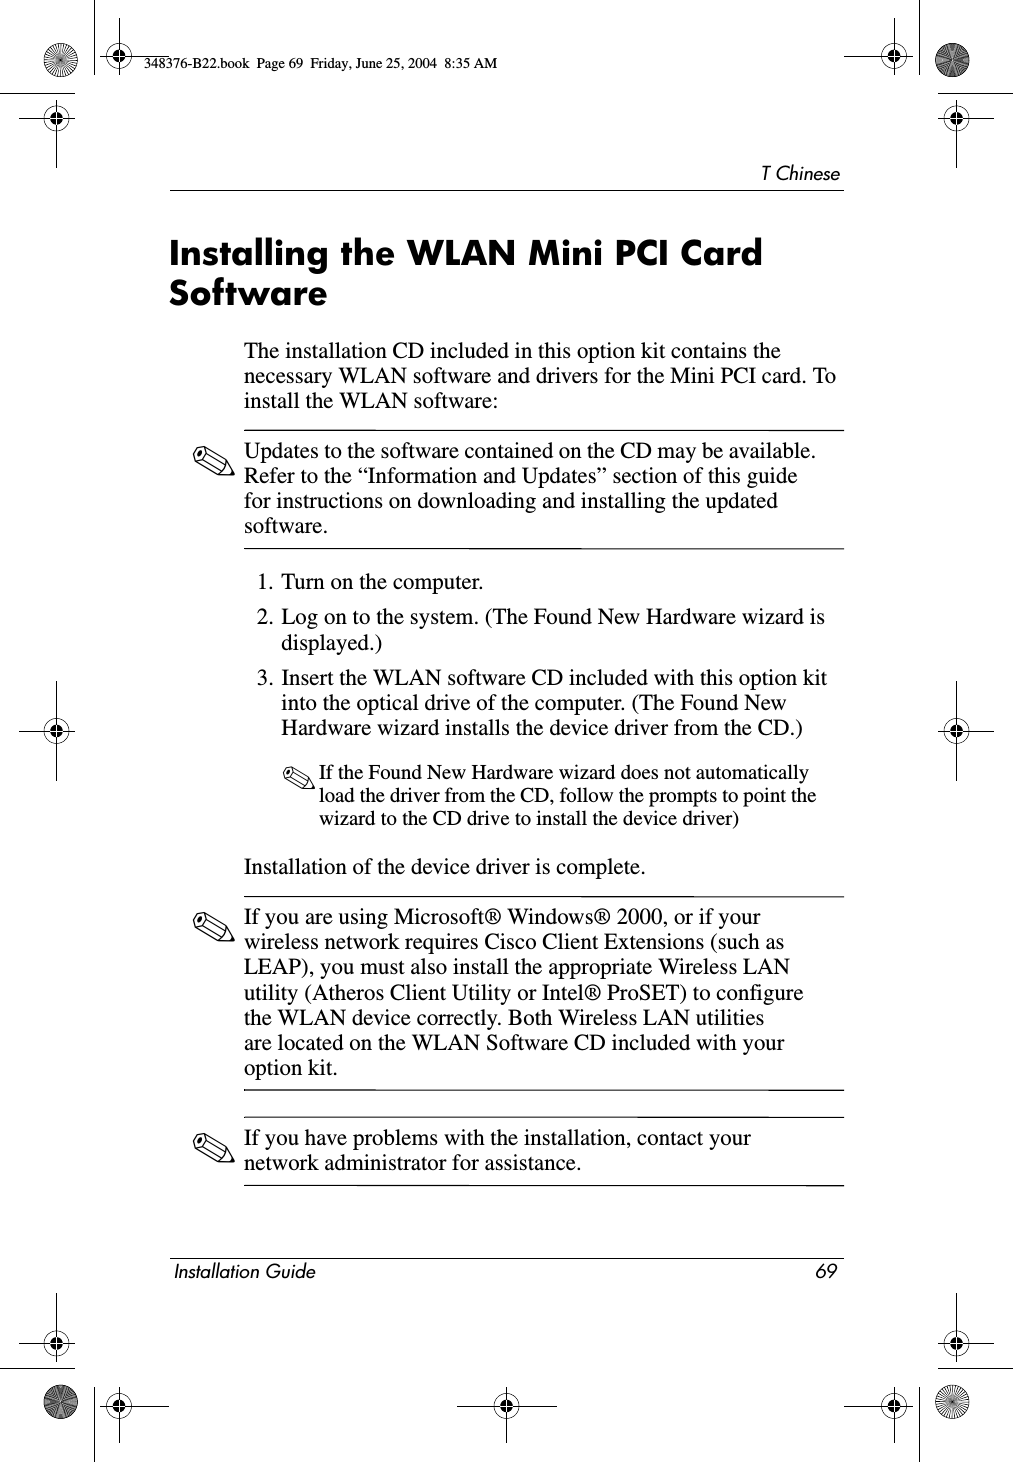 T ChineseInstallation Guide 69Installing the WLAN Mini PCI Card SoftwareThe installation CD included in this option kit contains the necessary WLAN software and drivers for the Mini PCI card. To install the WLAN software: ✎Updates to the software contained on the CD may be available. Refer to the “Information and Updates” section of this guide for instructions on downloading and installing the updated software.1. Turn on the computer.2. Log on to the system. (The Found New Hardware wizard is displayed.)3. Insert the WLAN software CD included with this option kit into the optical drive of the computer. (The Found New Hardware wizard installs the device driver from the CD.)✎If the Found New Hardware wizard does not automatically load the driver from the CD, follow the prompts to point the wizard to the CD drive to install the device driver)Installation of the device driver is complete.✎If you are using Microsoft® Windows® 2000, or if your wireless network requires Cisco Client Extensions (such as LEAP), you must also install the appropriate Wireless LAN utility (Atheros Client Utility or Intel® ProSET) to configure the WLAN device correctly. Both Wireless LAN utilities are located on the WLAN Software CD included with your option kit. ✎If you have problems with the installation, contact your network administrator for assistance.348376-B22.book  Page 69  Friday, June 25, 2004  8:35 AM